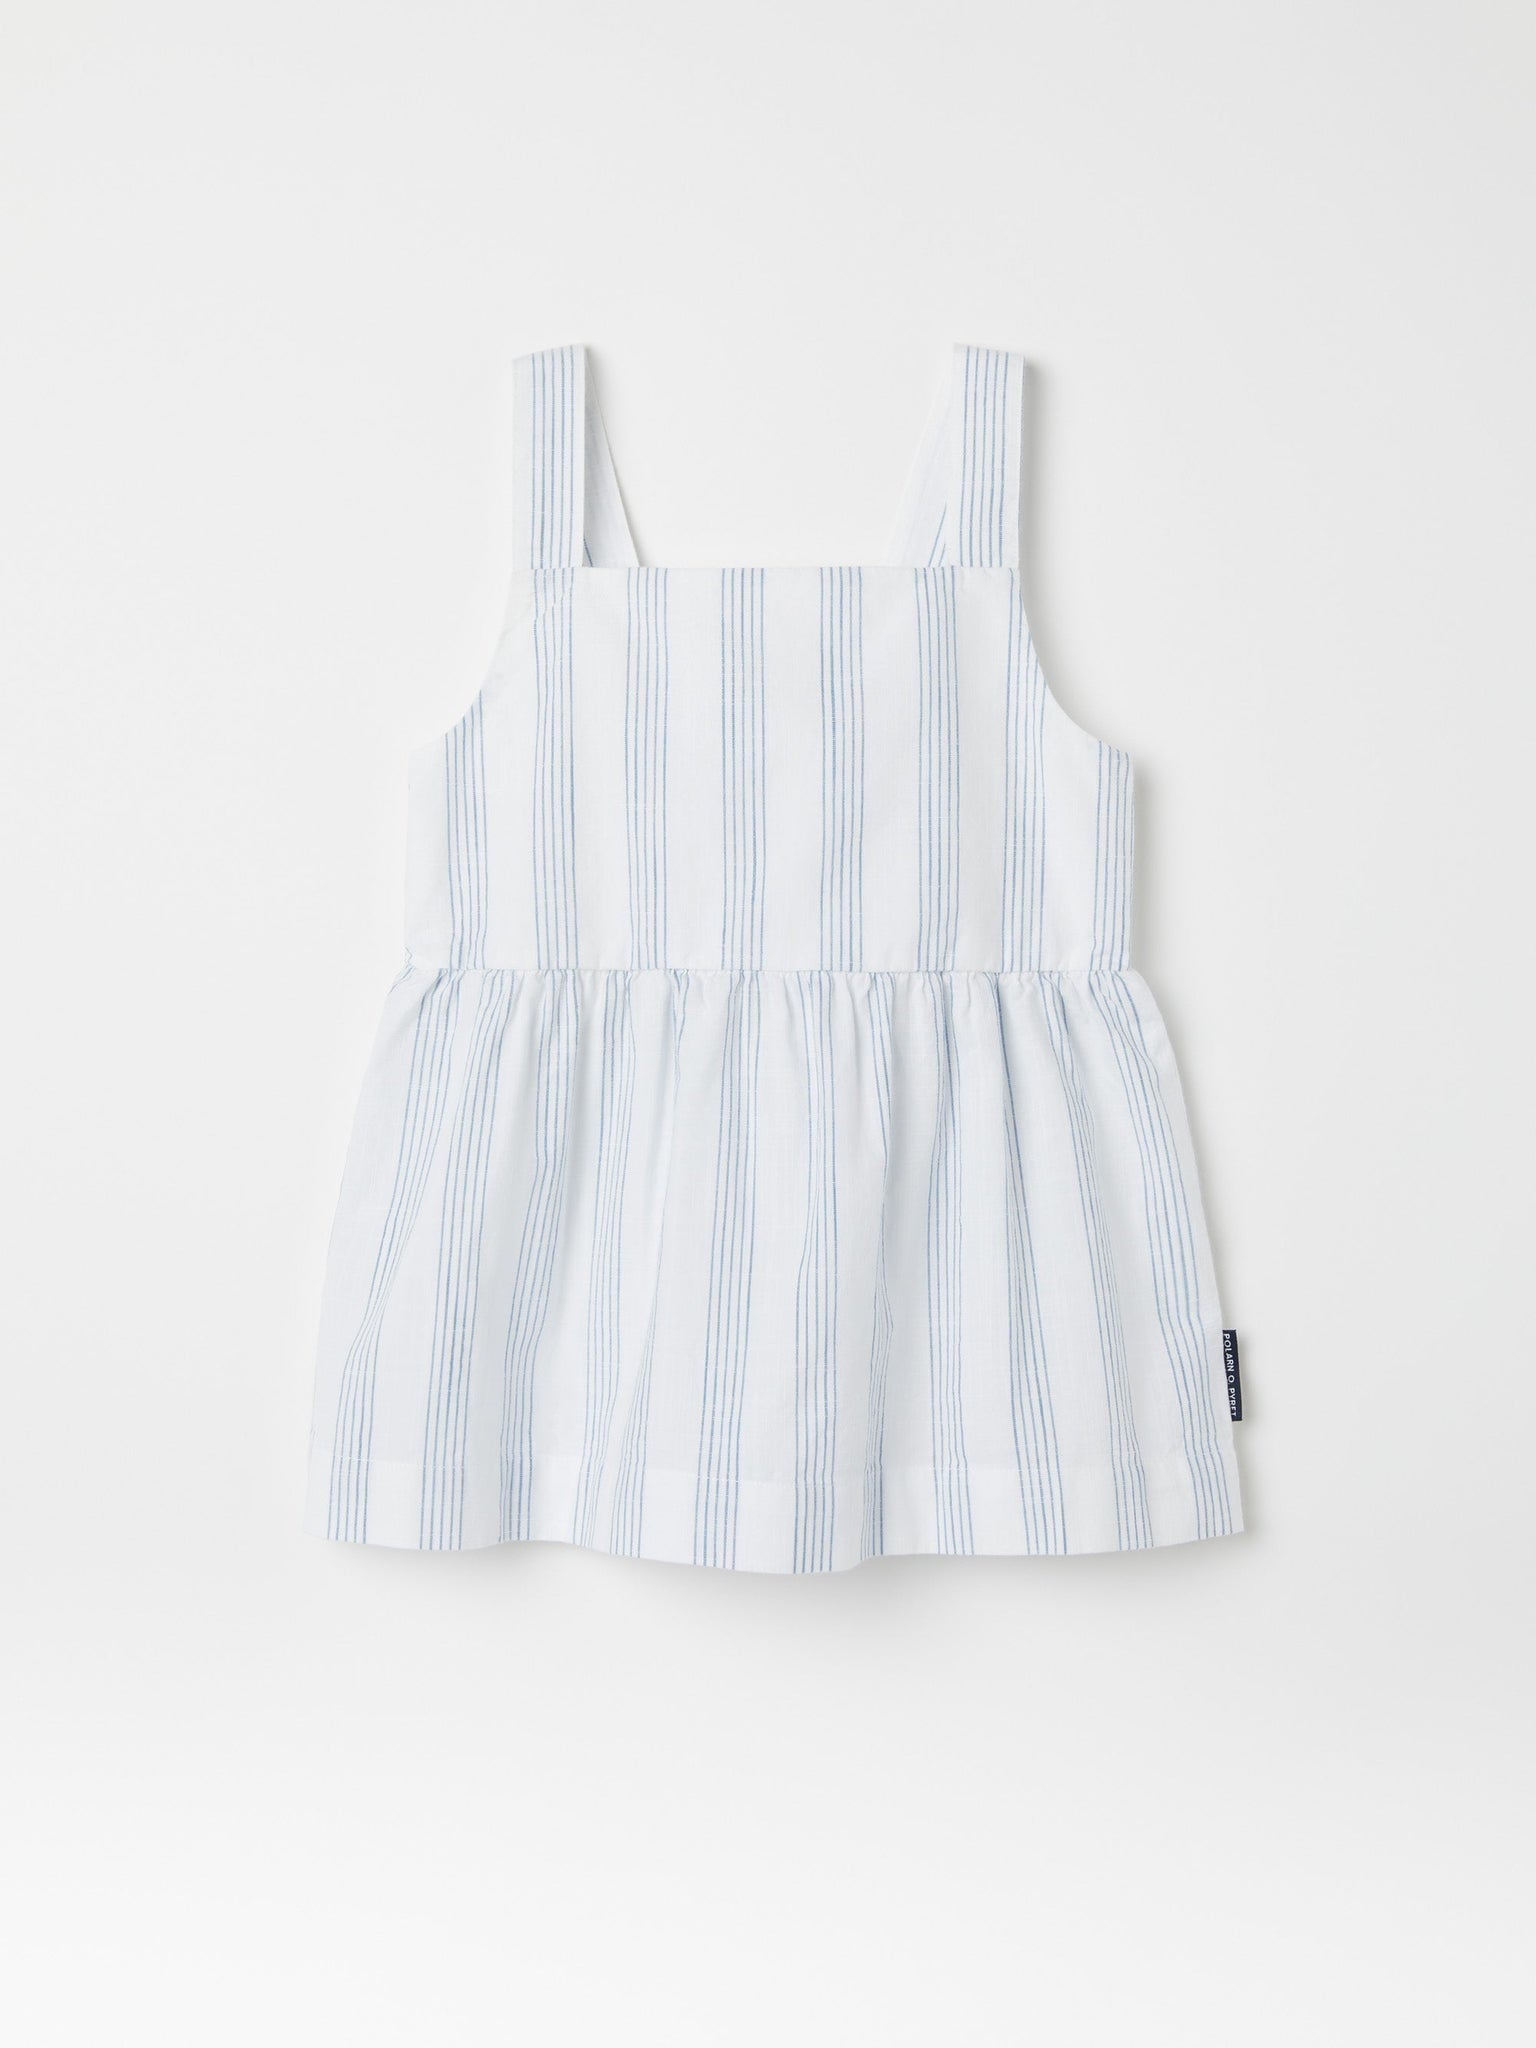 Striped Organic Cotton Kids Vest Top from the Polarn O. Pyret kidswear collection. Clothes made using sustainably sourced materials.